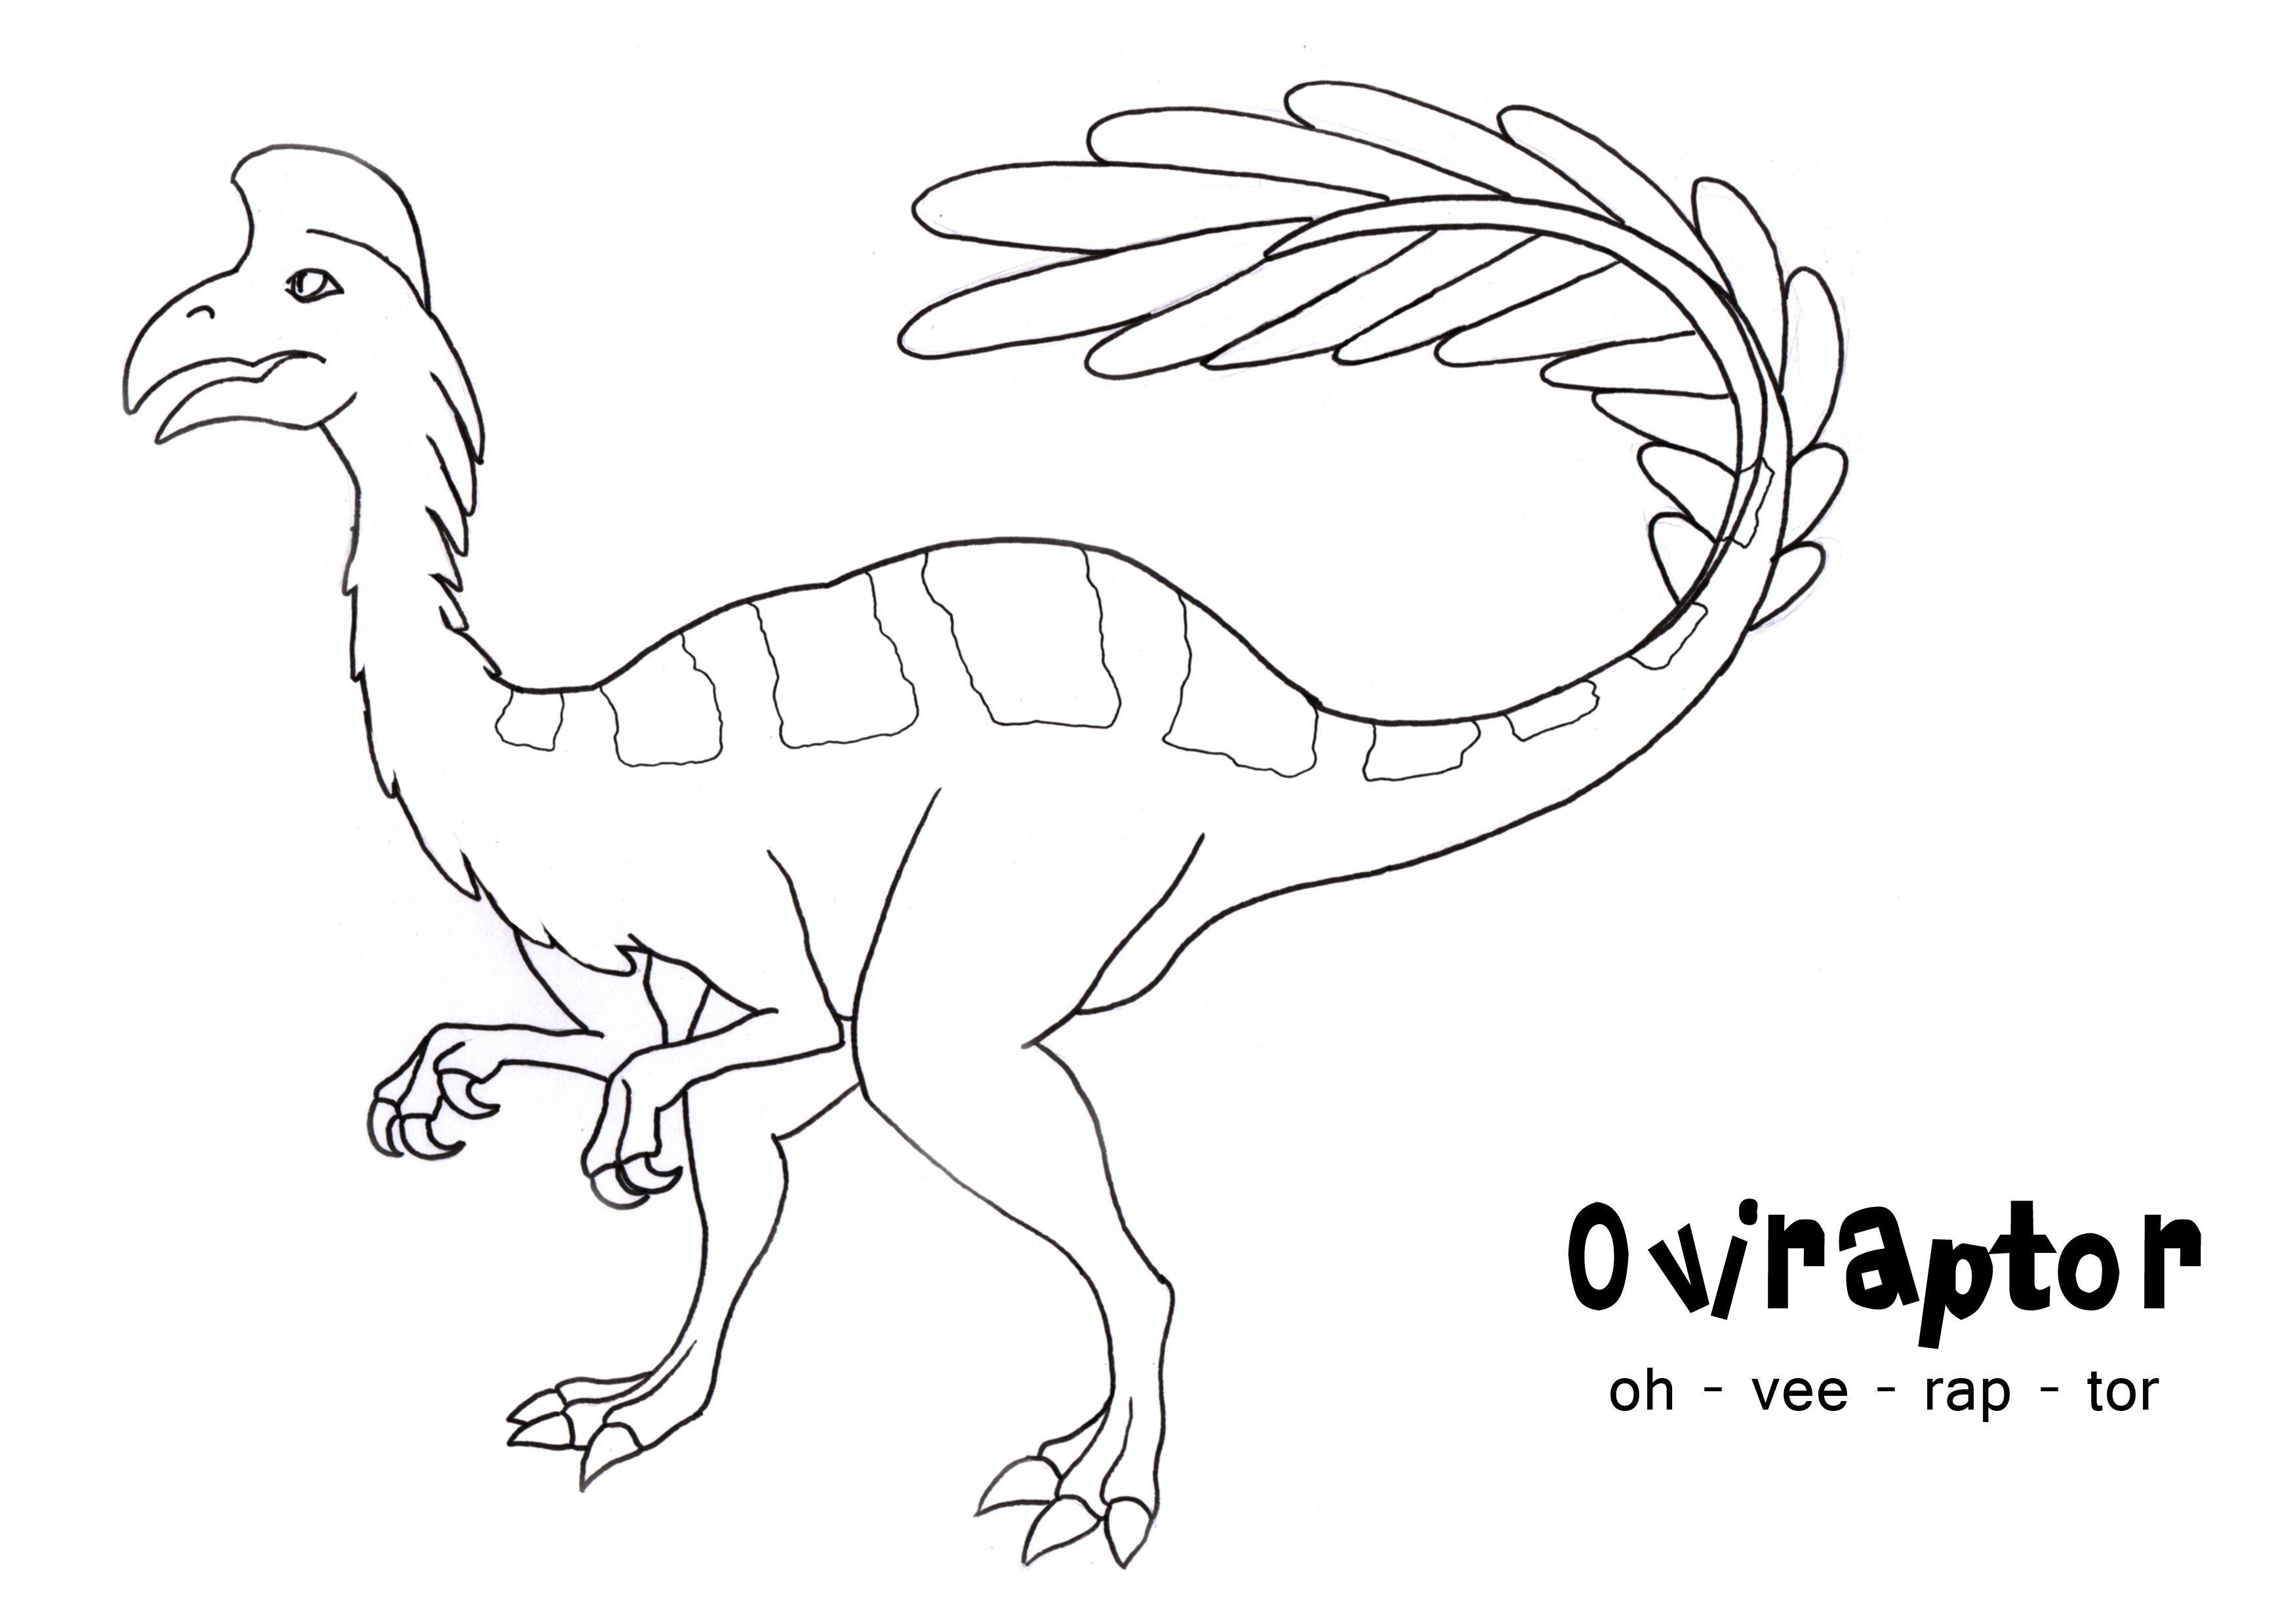 Oviraptor is genus of feather dinosaur of Archaeopteryx type from Archaeopteryx